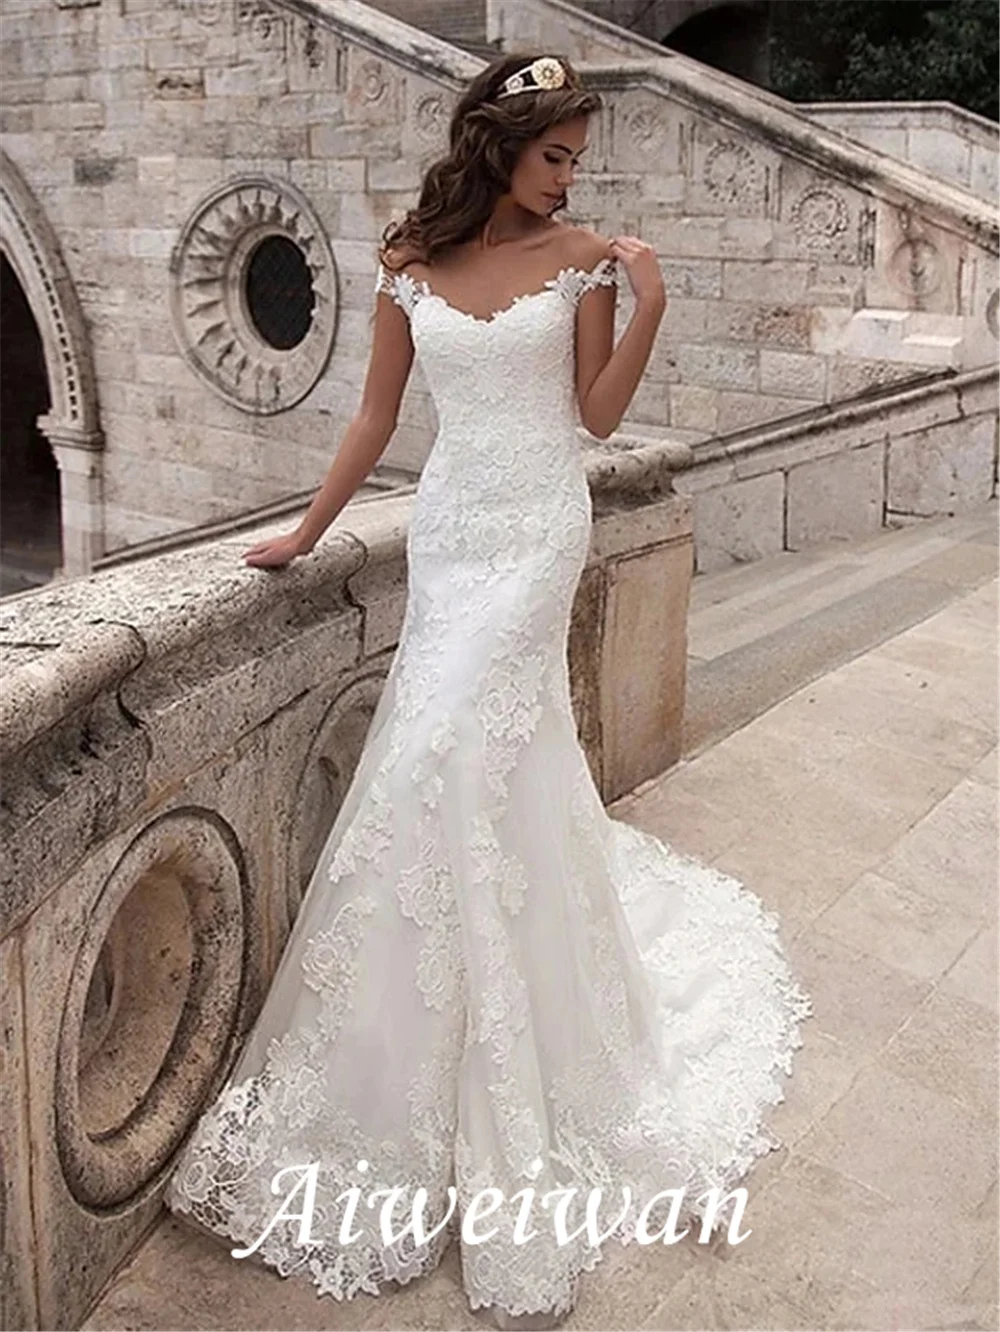 

Trumpet Wedding Dresses Off Shoulder Court Train Tulle Lace Over Satin Short Sleeve Illusion Detail Backless with Appliques 2021